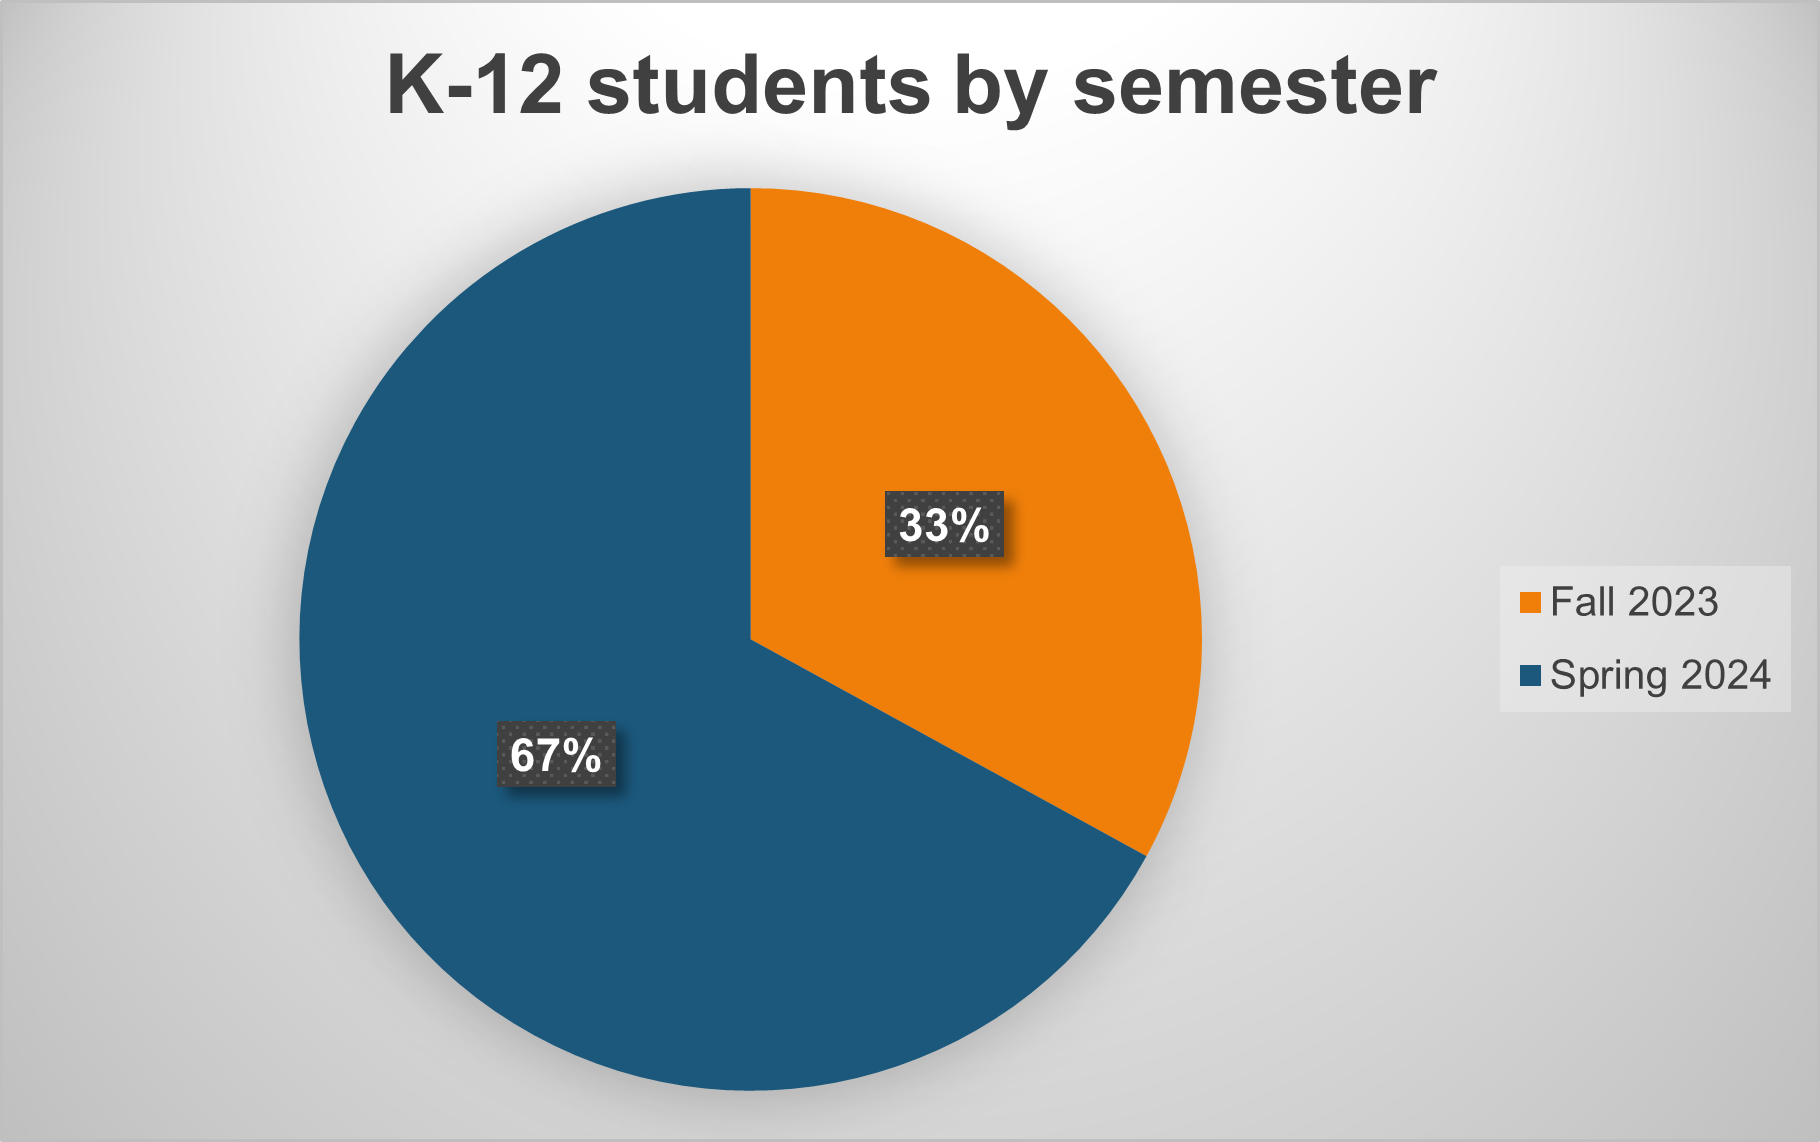 Show that 67% of the outreach happened in the spring 2024 semester.